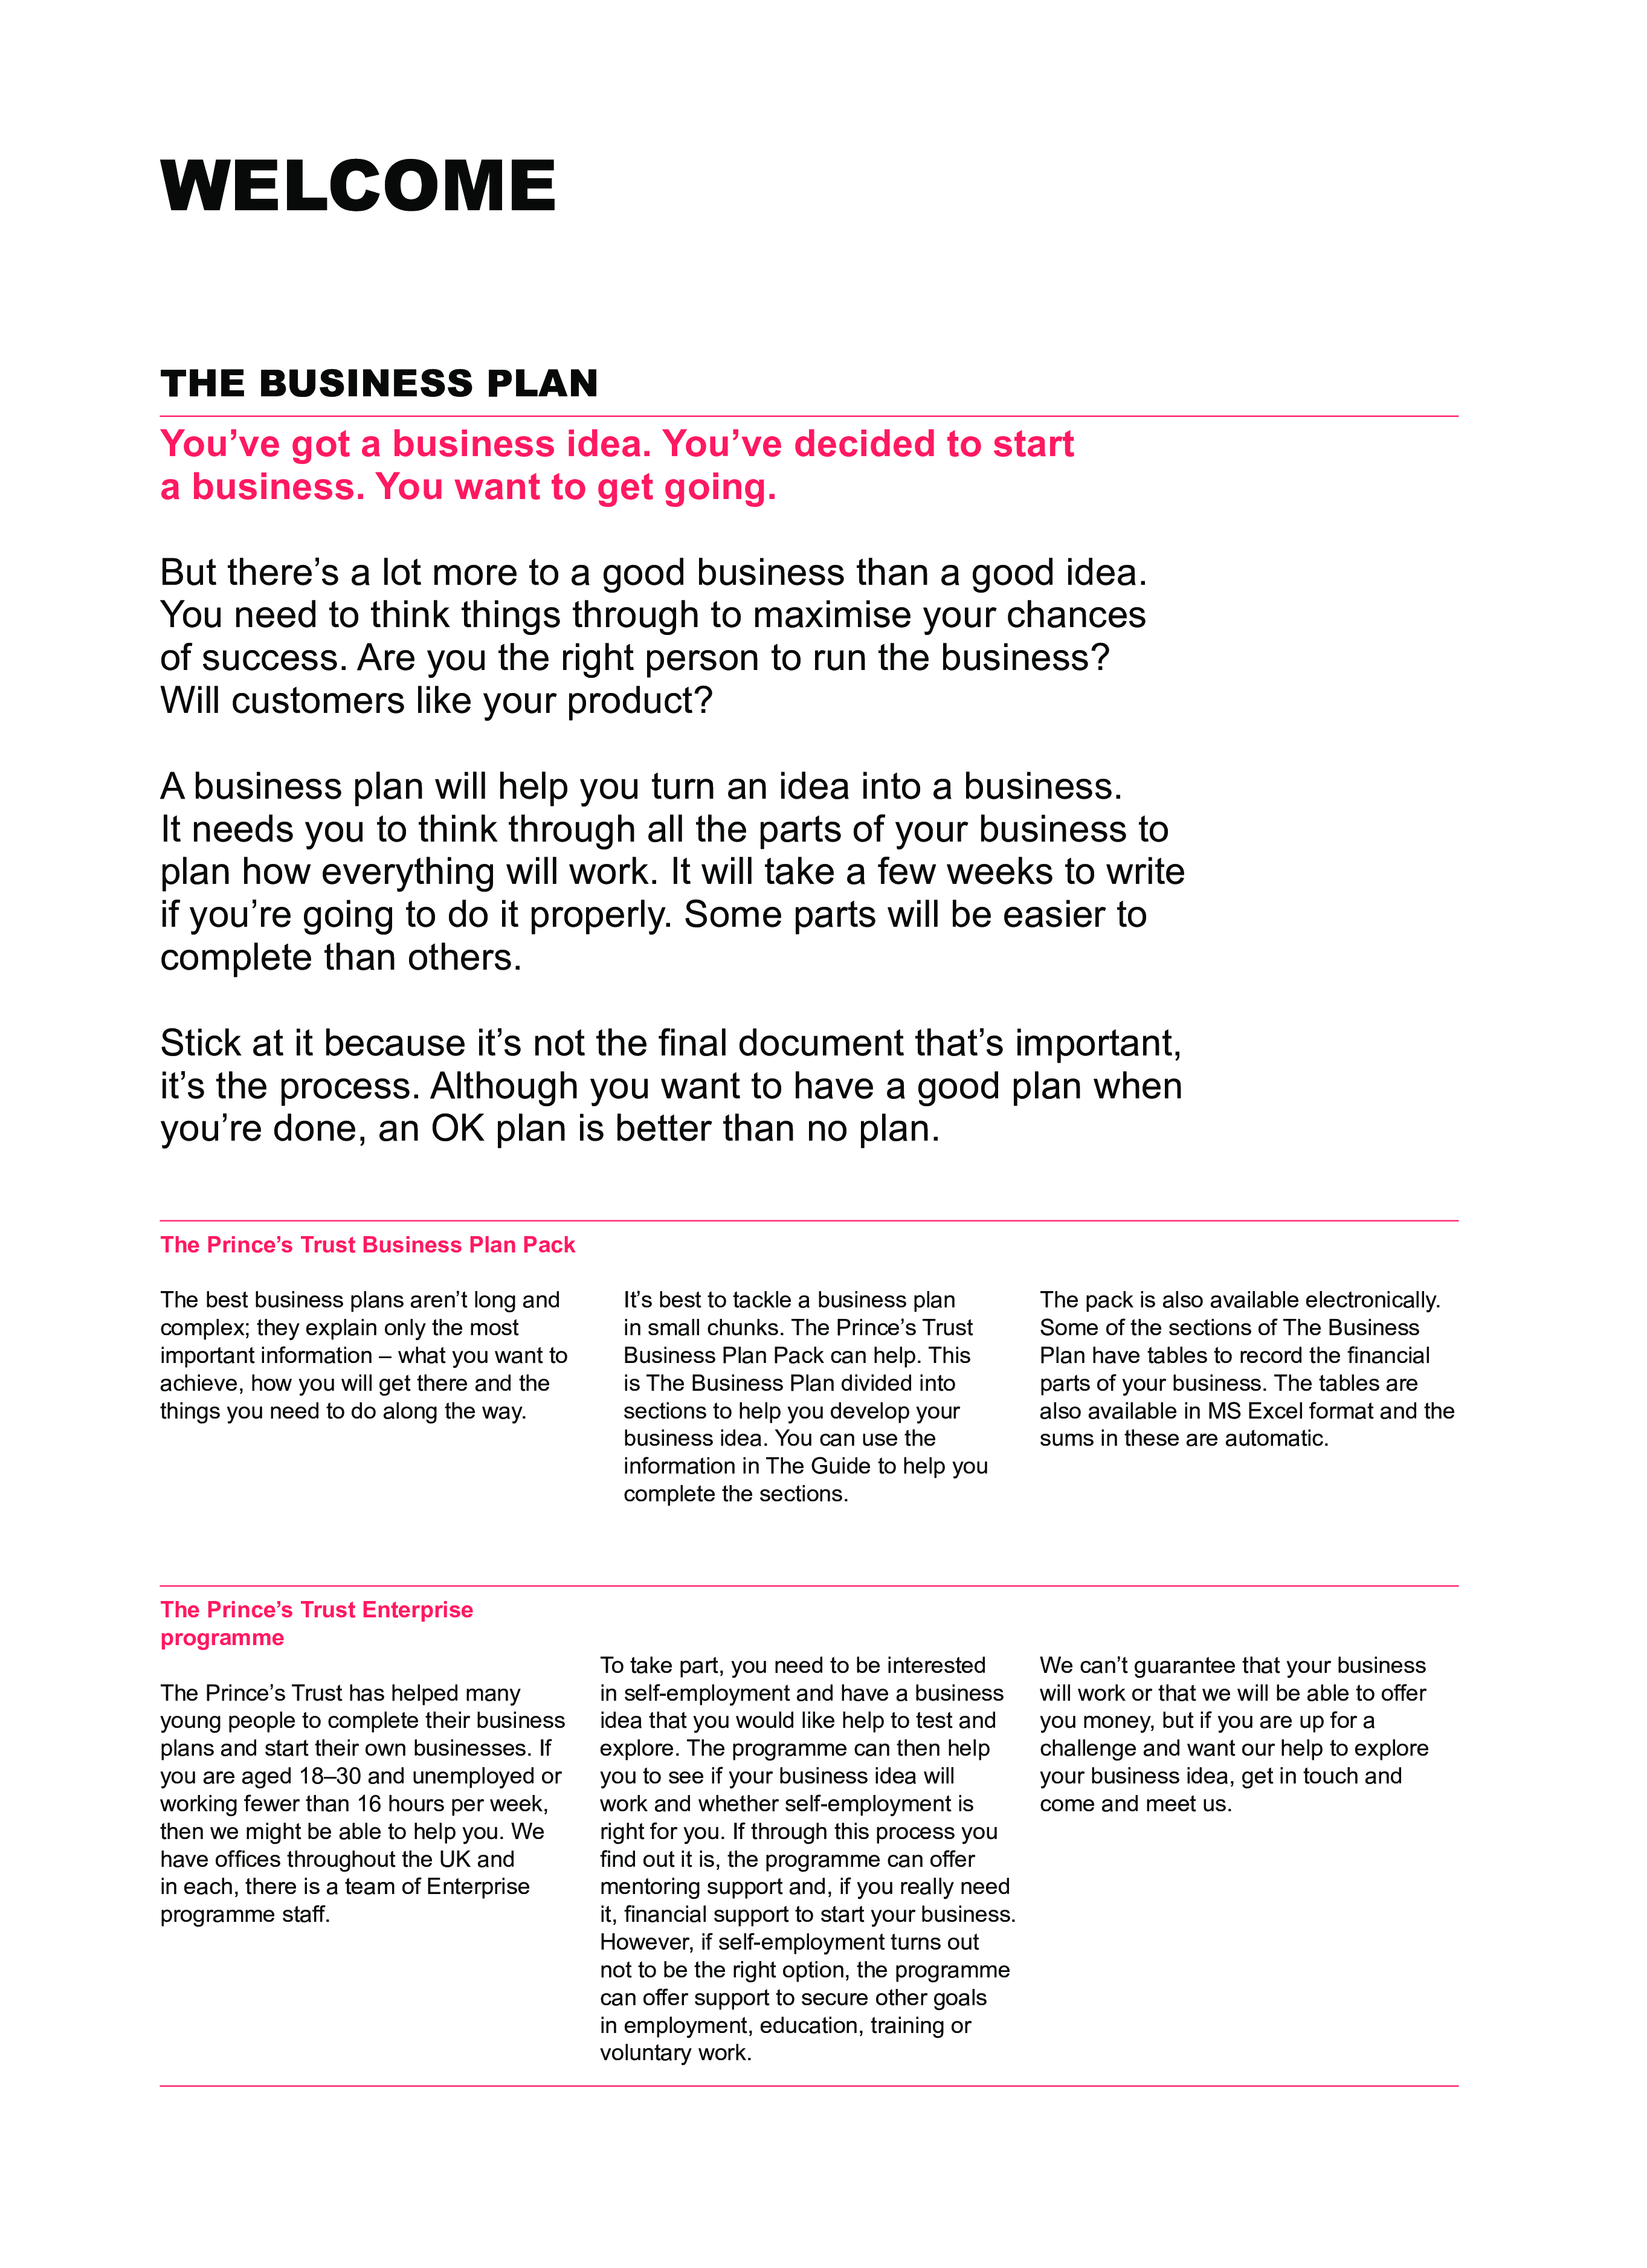 sample of a wholesale business plan